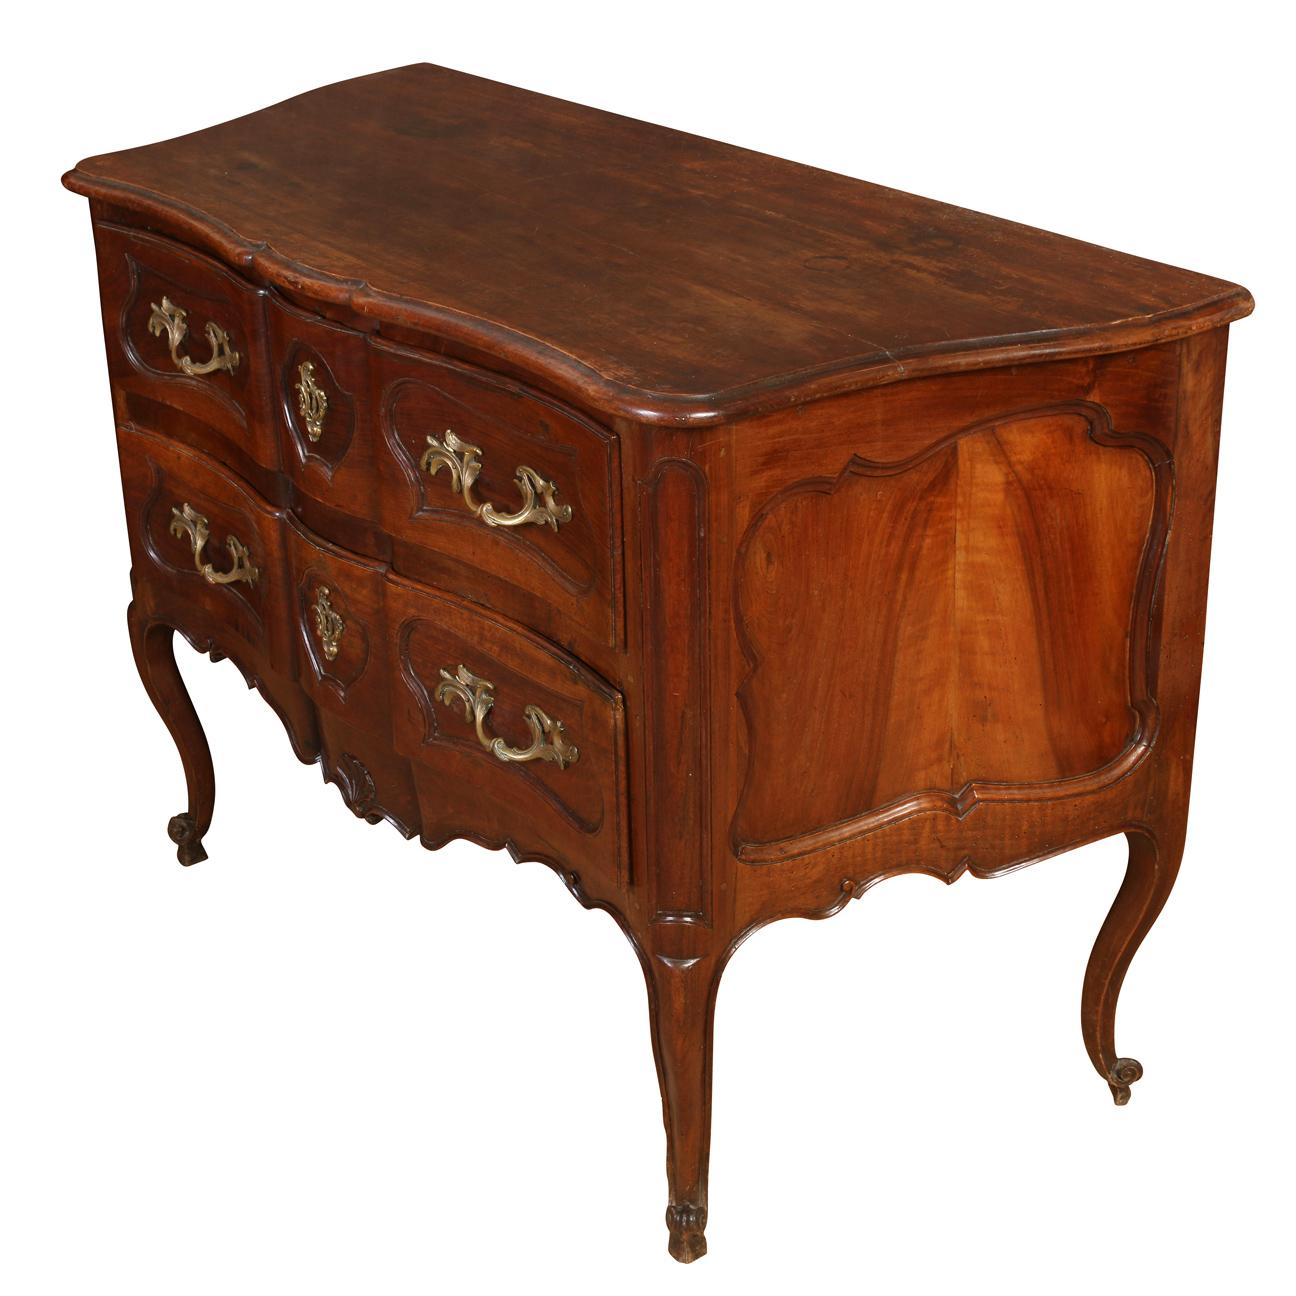 Antique French walnut two drawer commode with gilt metal mounts and hardware, carved, curved legs and shaped top.